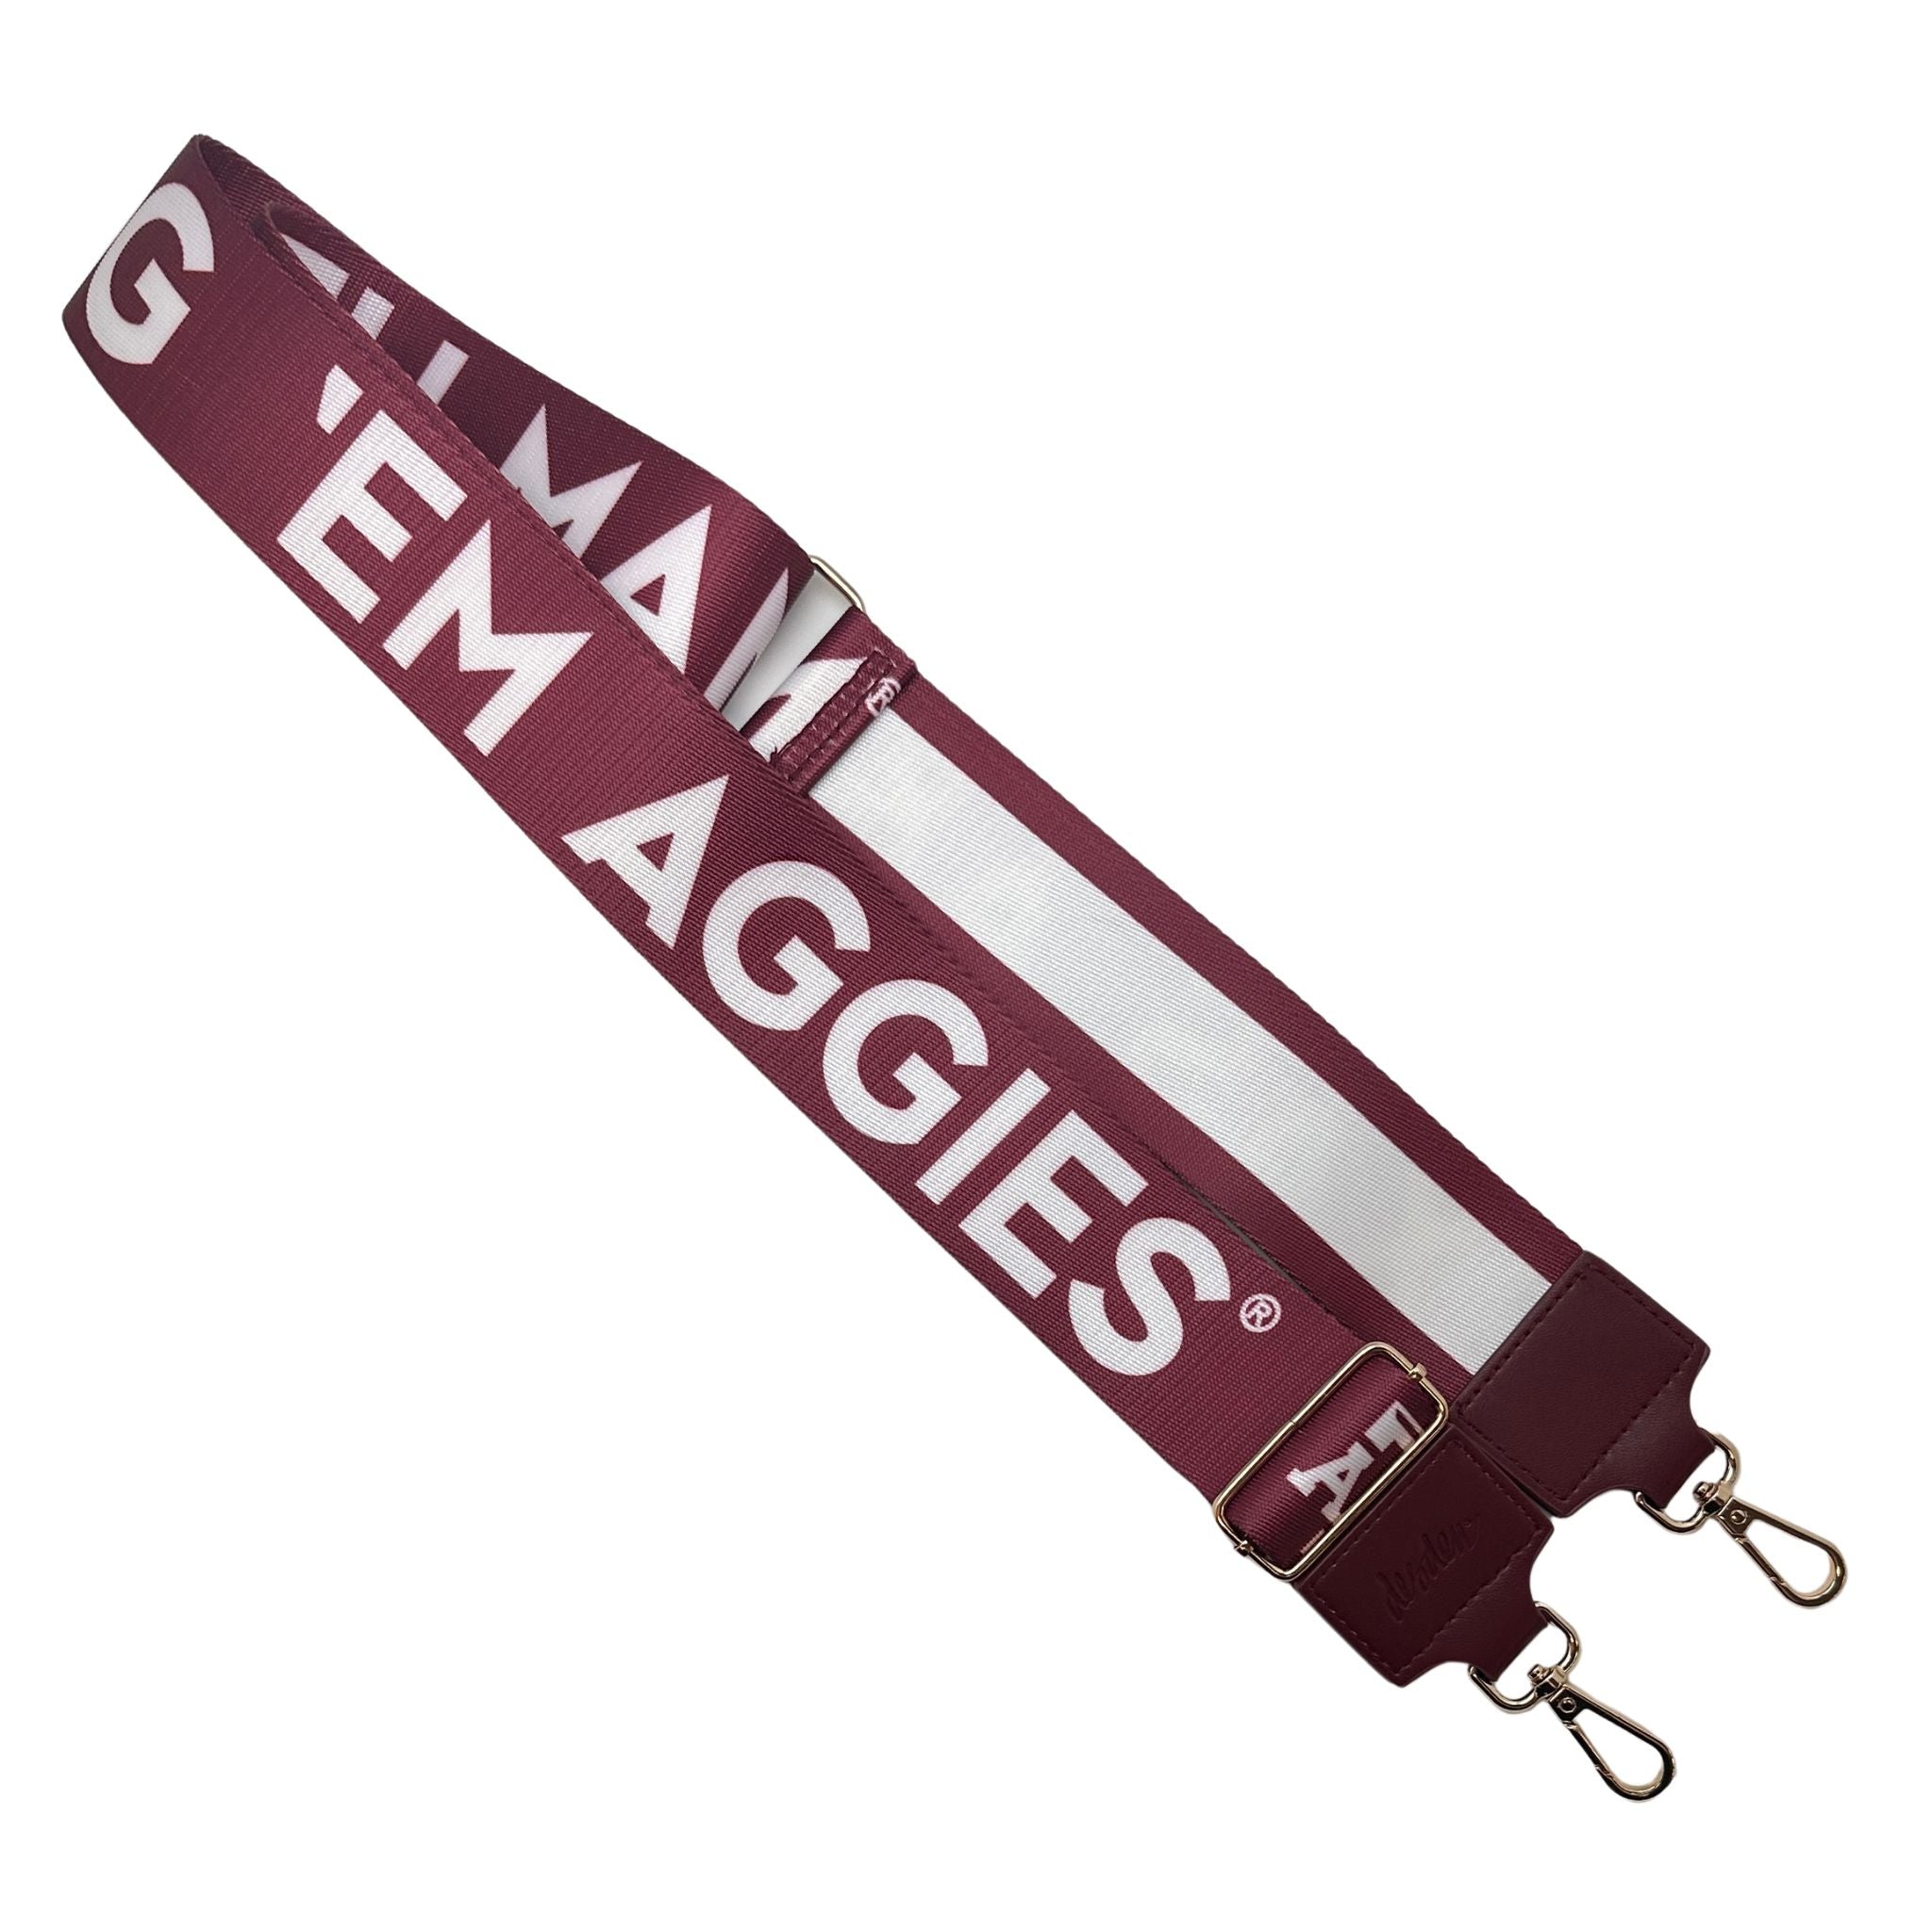 TEXAS A&M 2" - Officially Licensed - Stripe